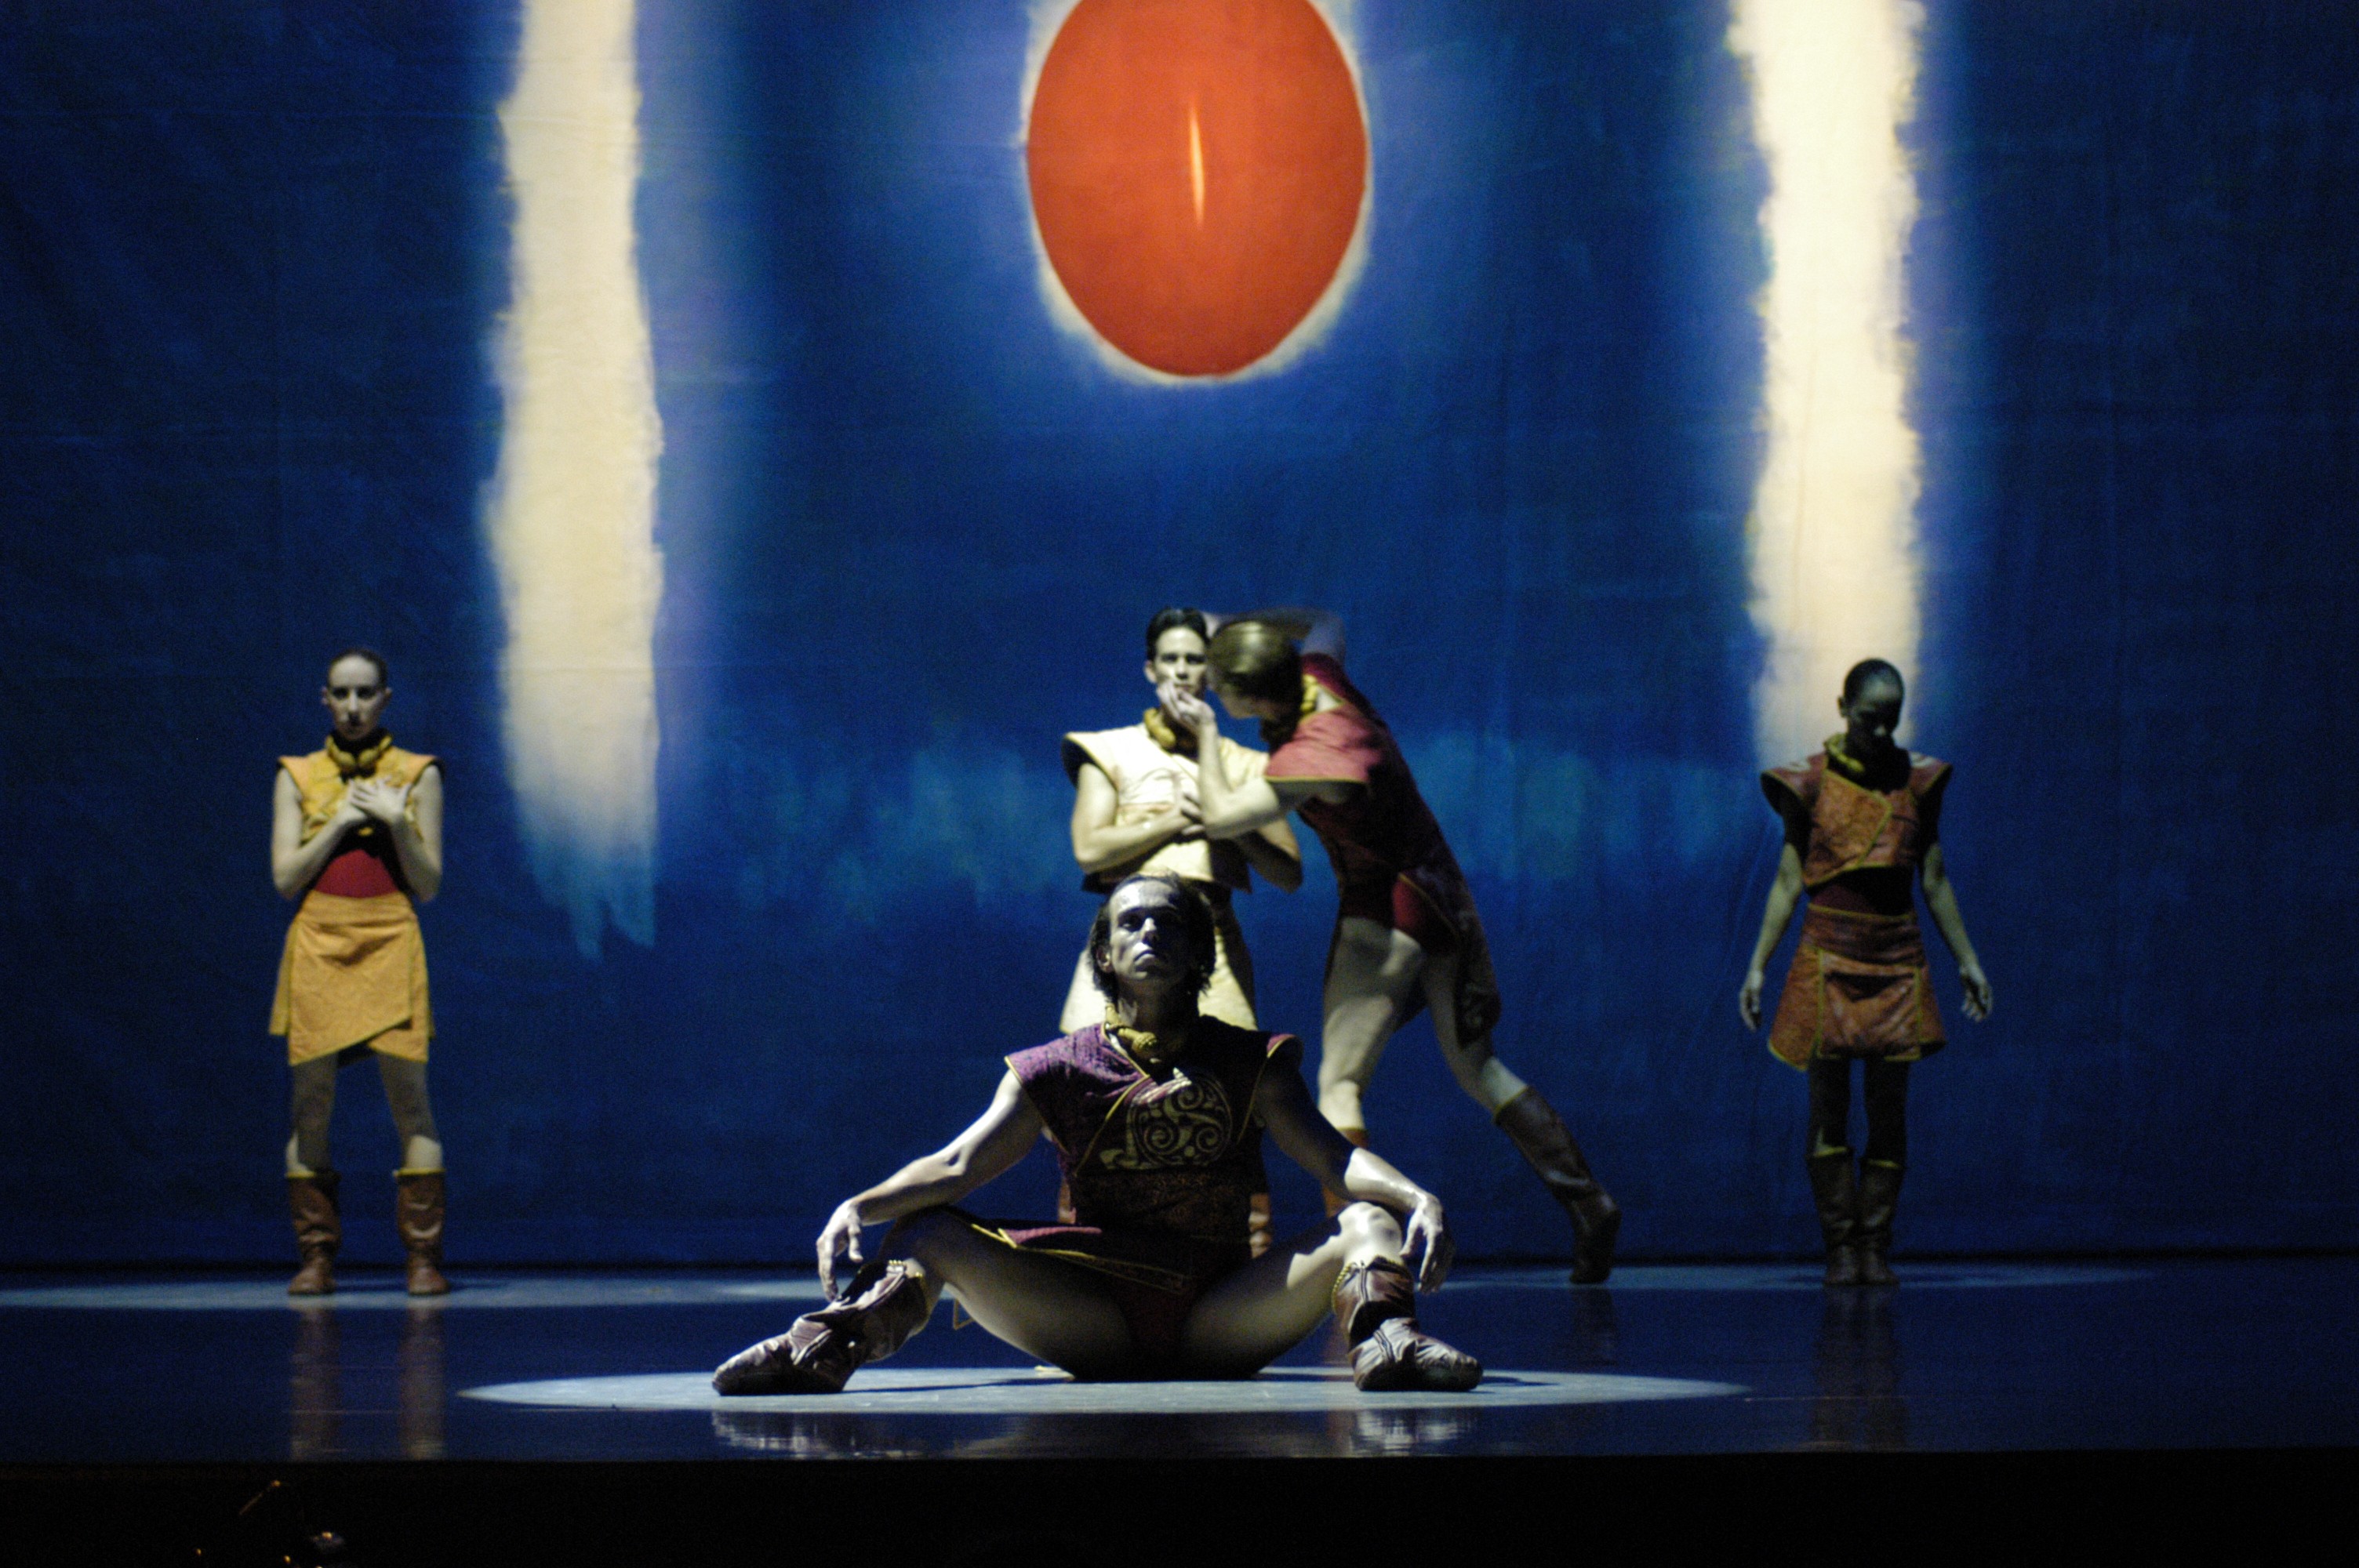 Passions by the Minnesota Ballet, Lighting design by Ken Pogin.